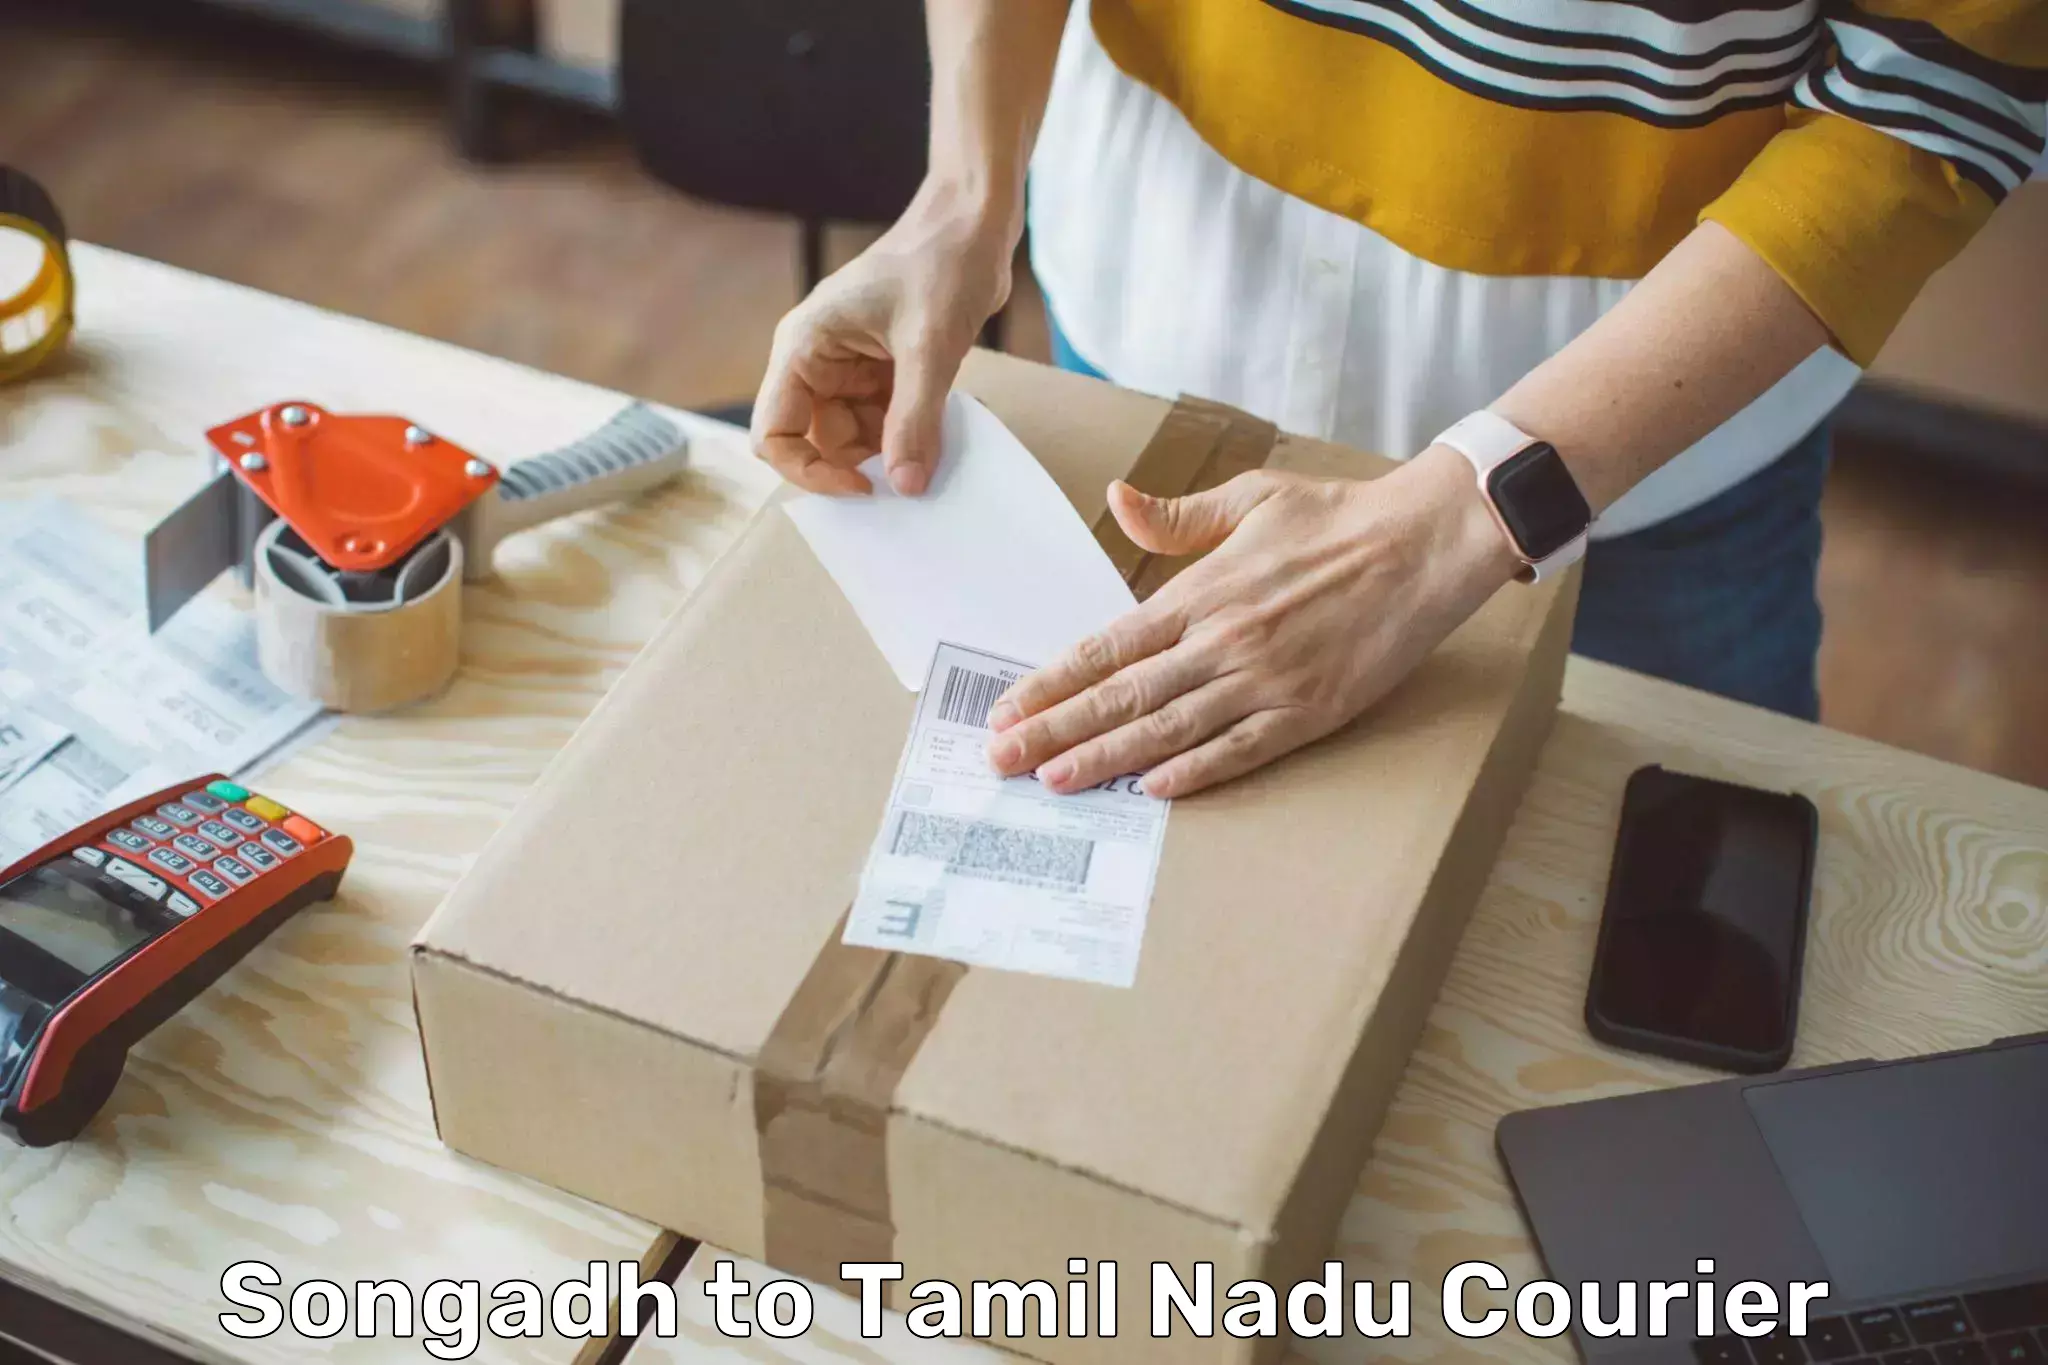 Personalized courier experiences Songadh to Dharmapuri